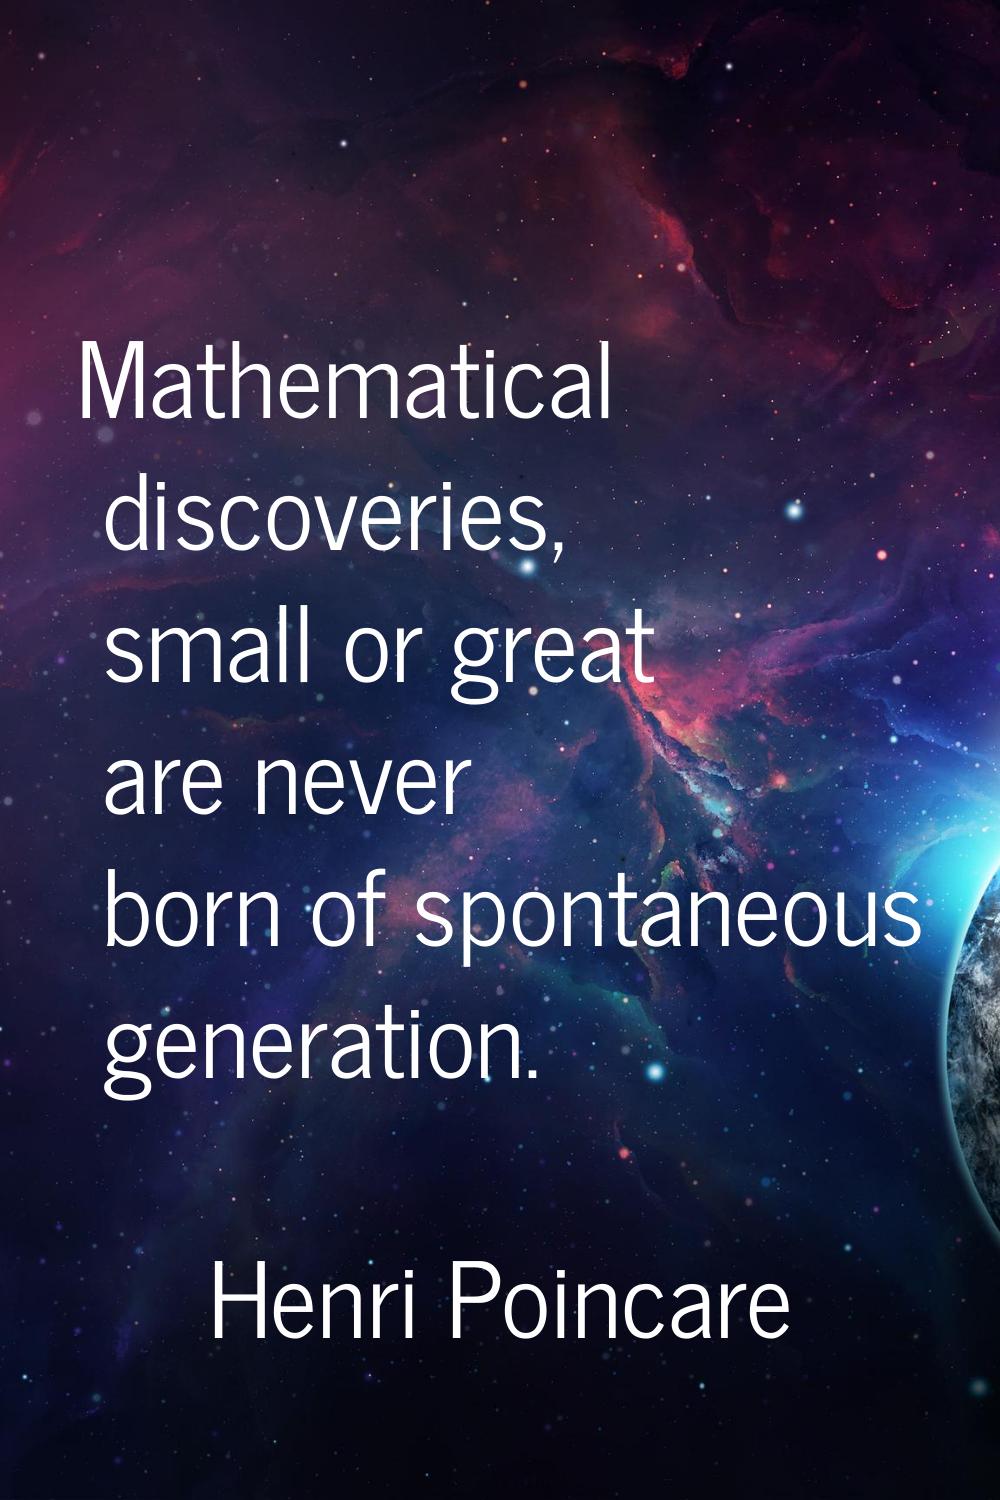 Mathematical discoveries, small or great are never born of spontaneous generation.